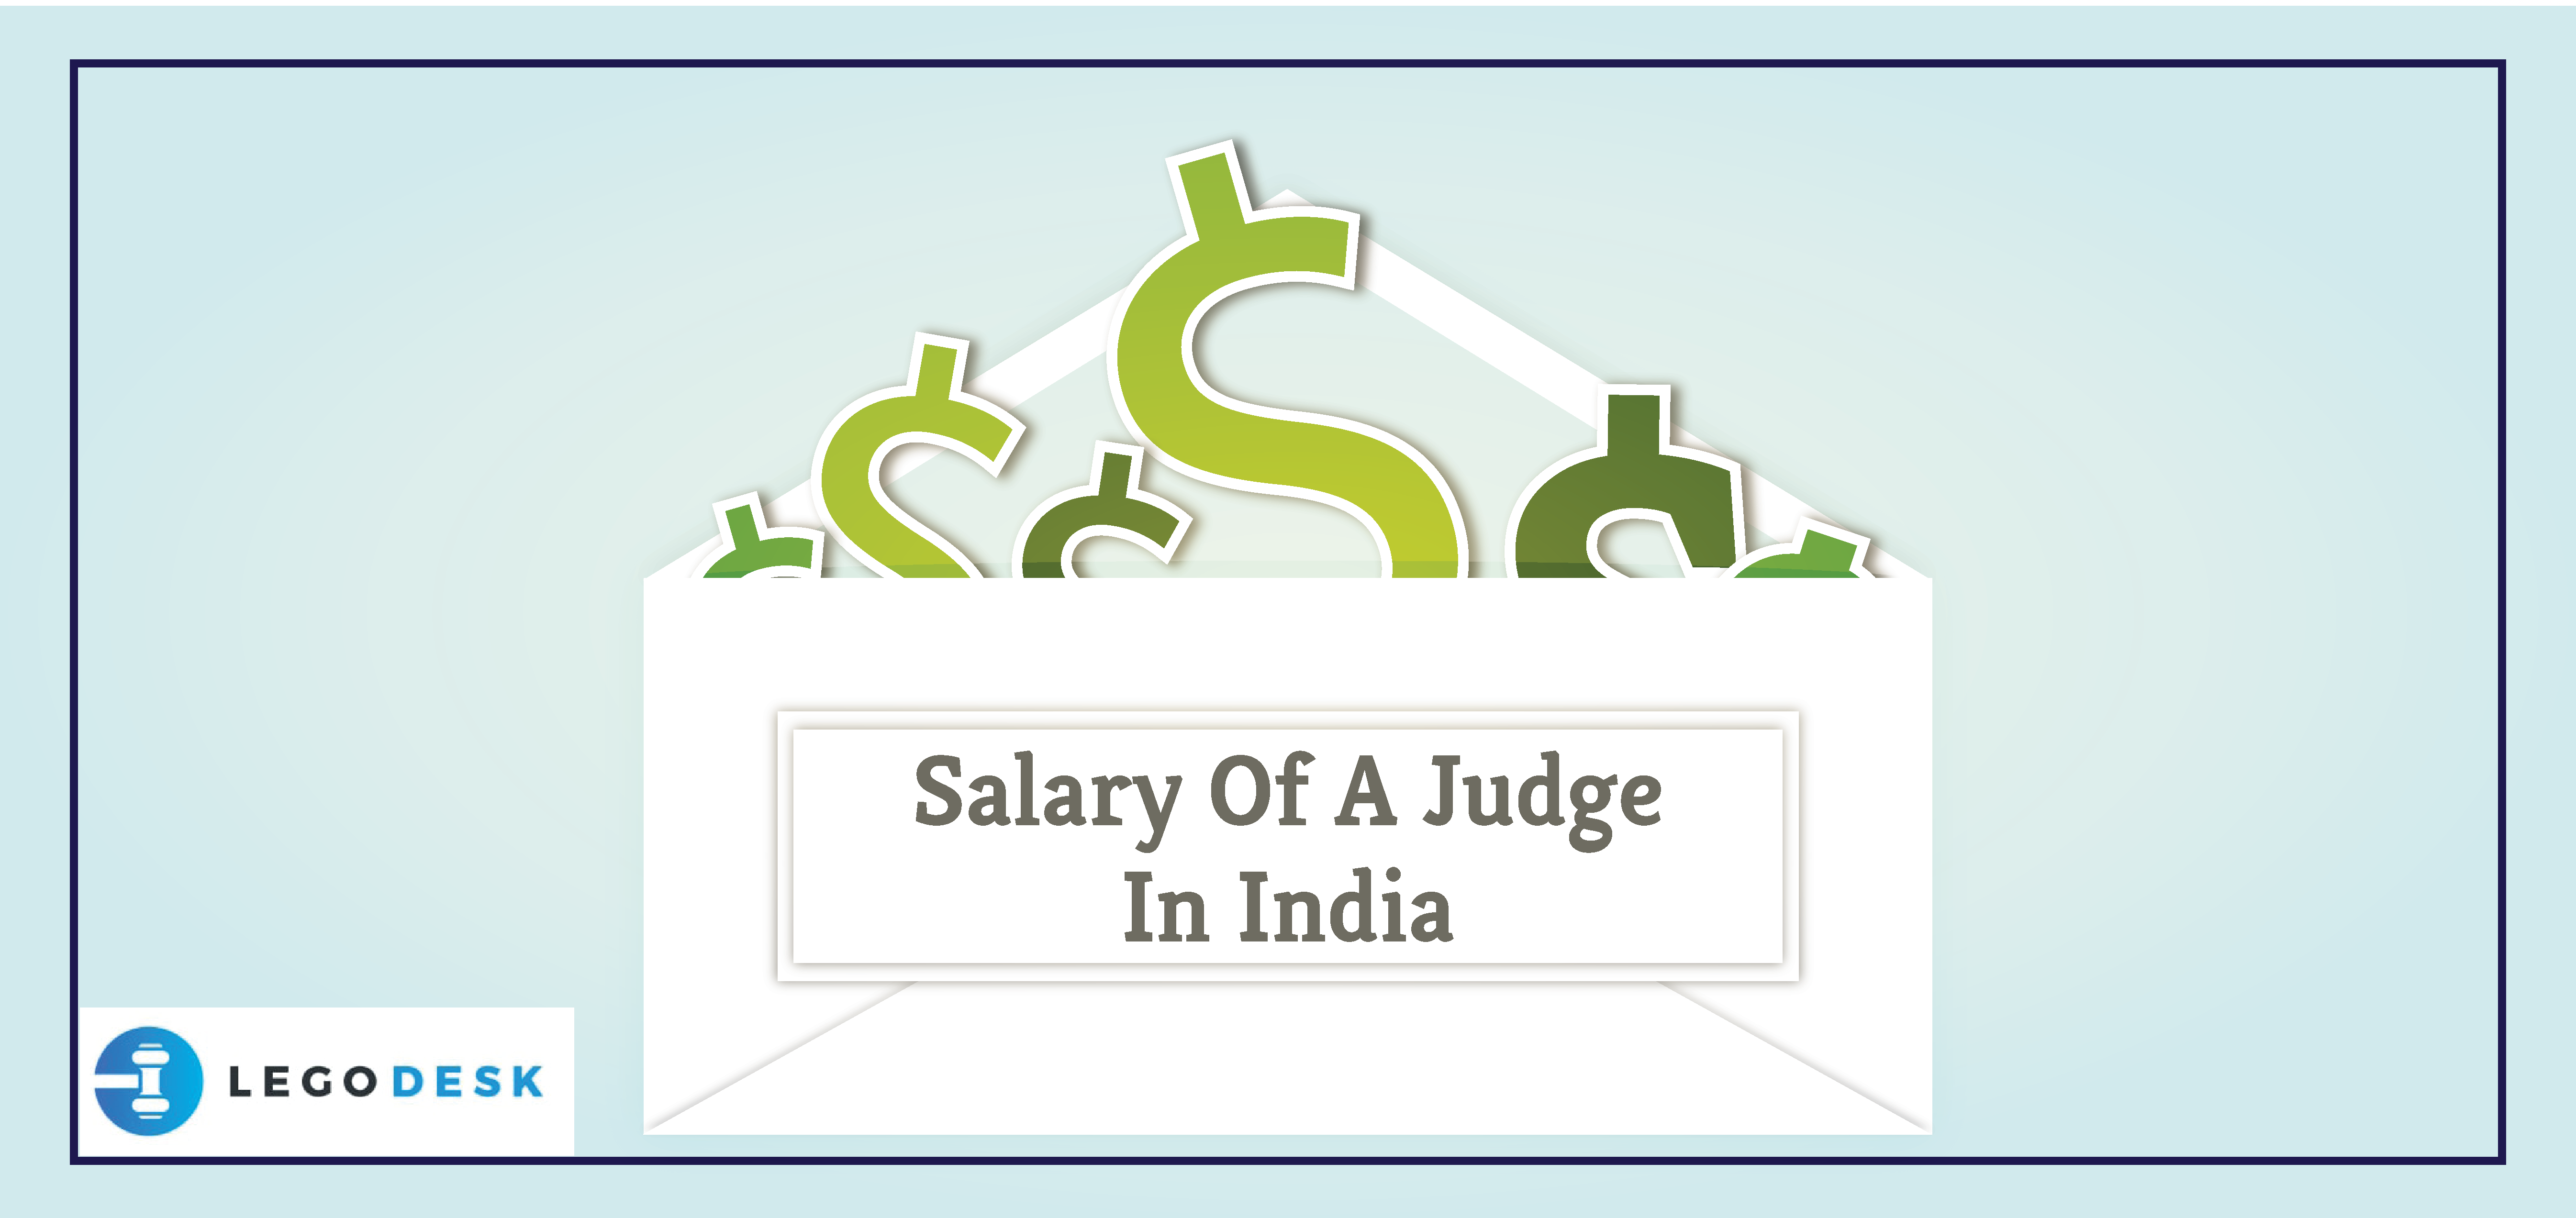 Salary of Judges In India